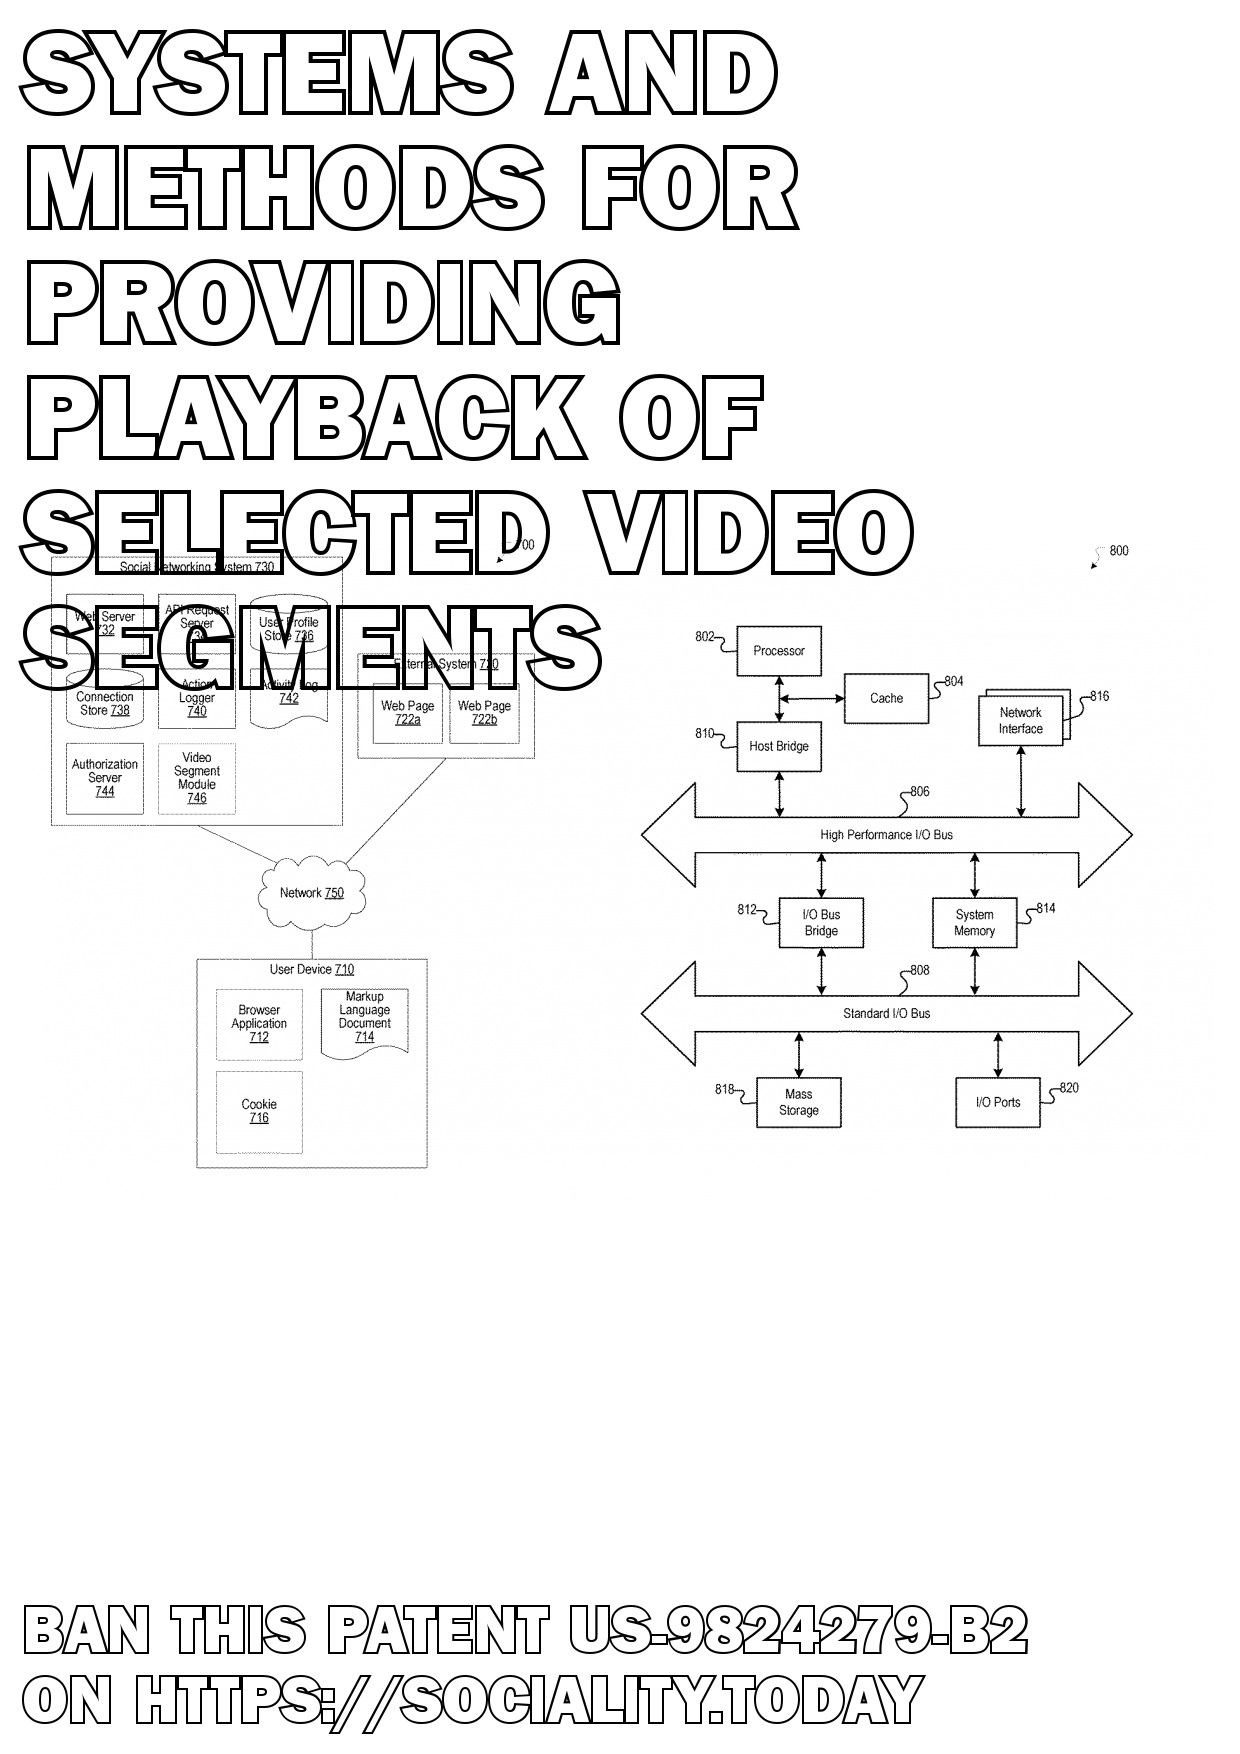 Systems and methods for providing playback of selected video segments  - US-9824279-B2